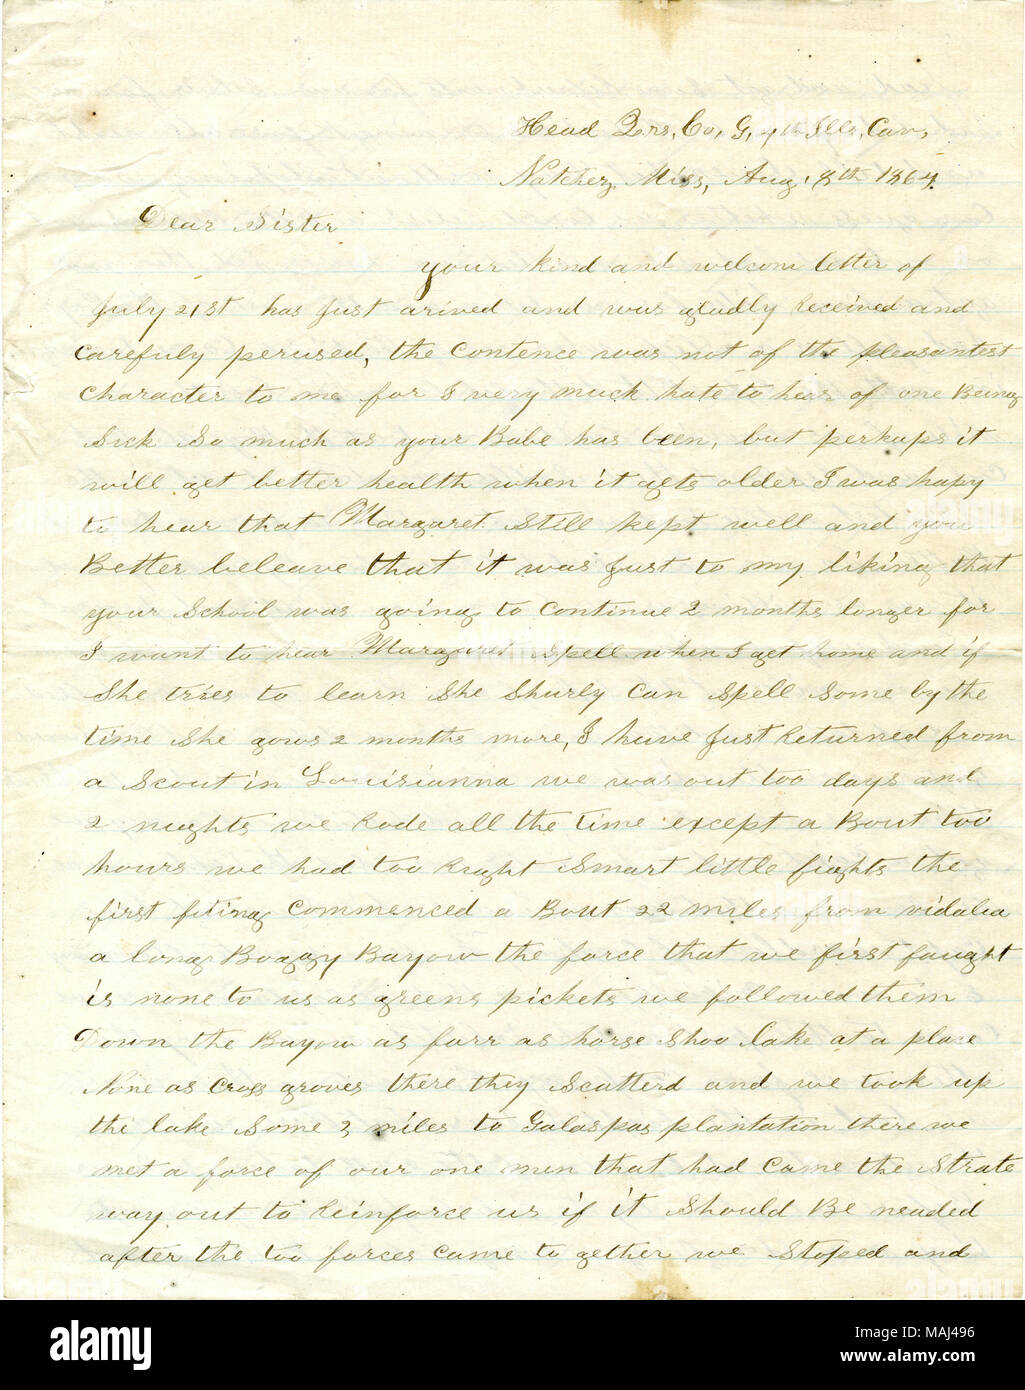 Describes regimental affairs. Writes of a widow he intends to marry.  Transcription: Head Qrs, Co, G, 4th Ills, Cav, Natchez Miss, Aug. 8th 1864 Dear Sister your kind and welcom letter of July 21st has Just arived and was gladly Received and carefuly persued, the contence was not of the pleasantest character to me for I very much hate to hear of one Being Sick So much as your Babe has been, but perhaps it will get better health when it gets older I was hapy to hear that Margaret still kept well and you Better beleave that it was Just to my liking that your School was going to continue 2 months Stock Photo